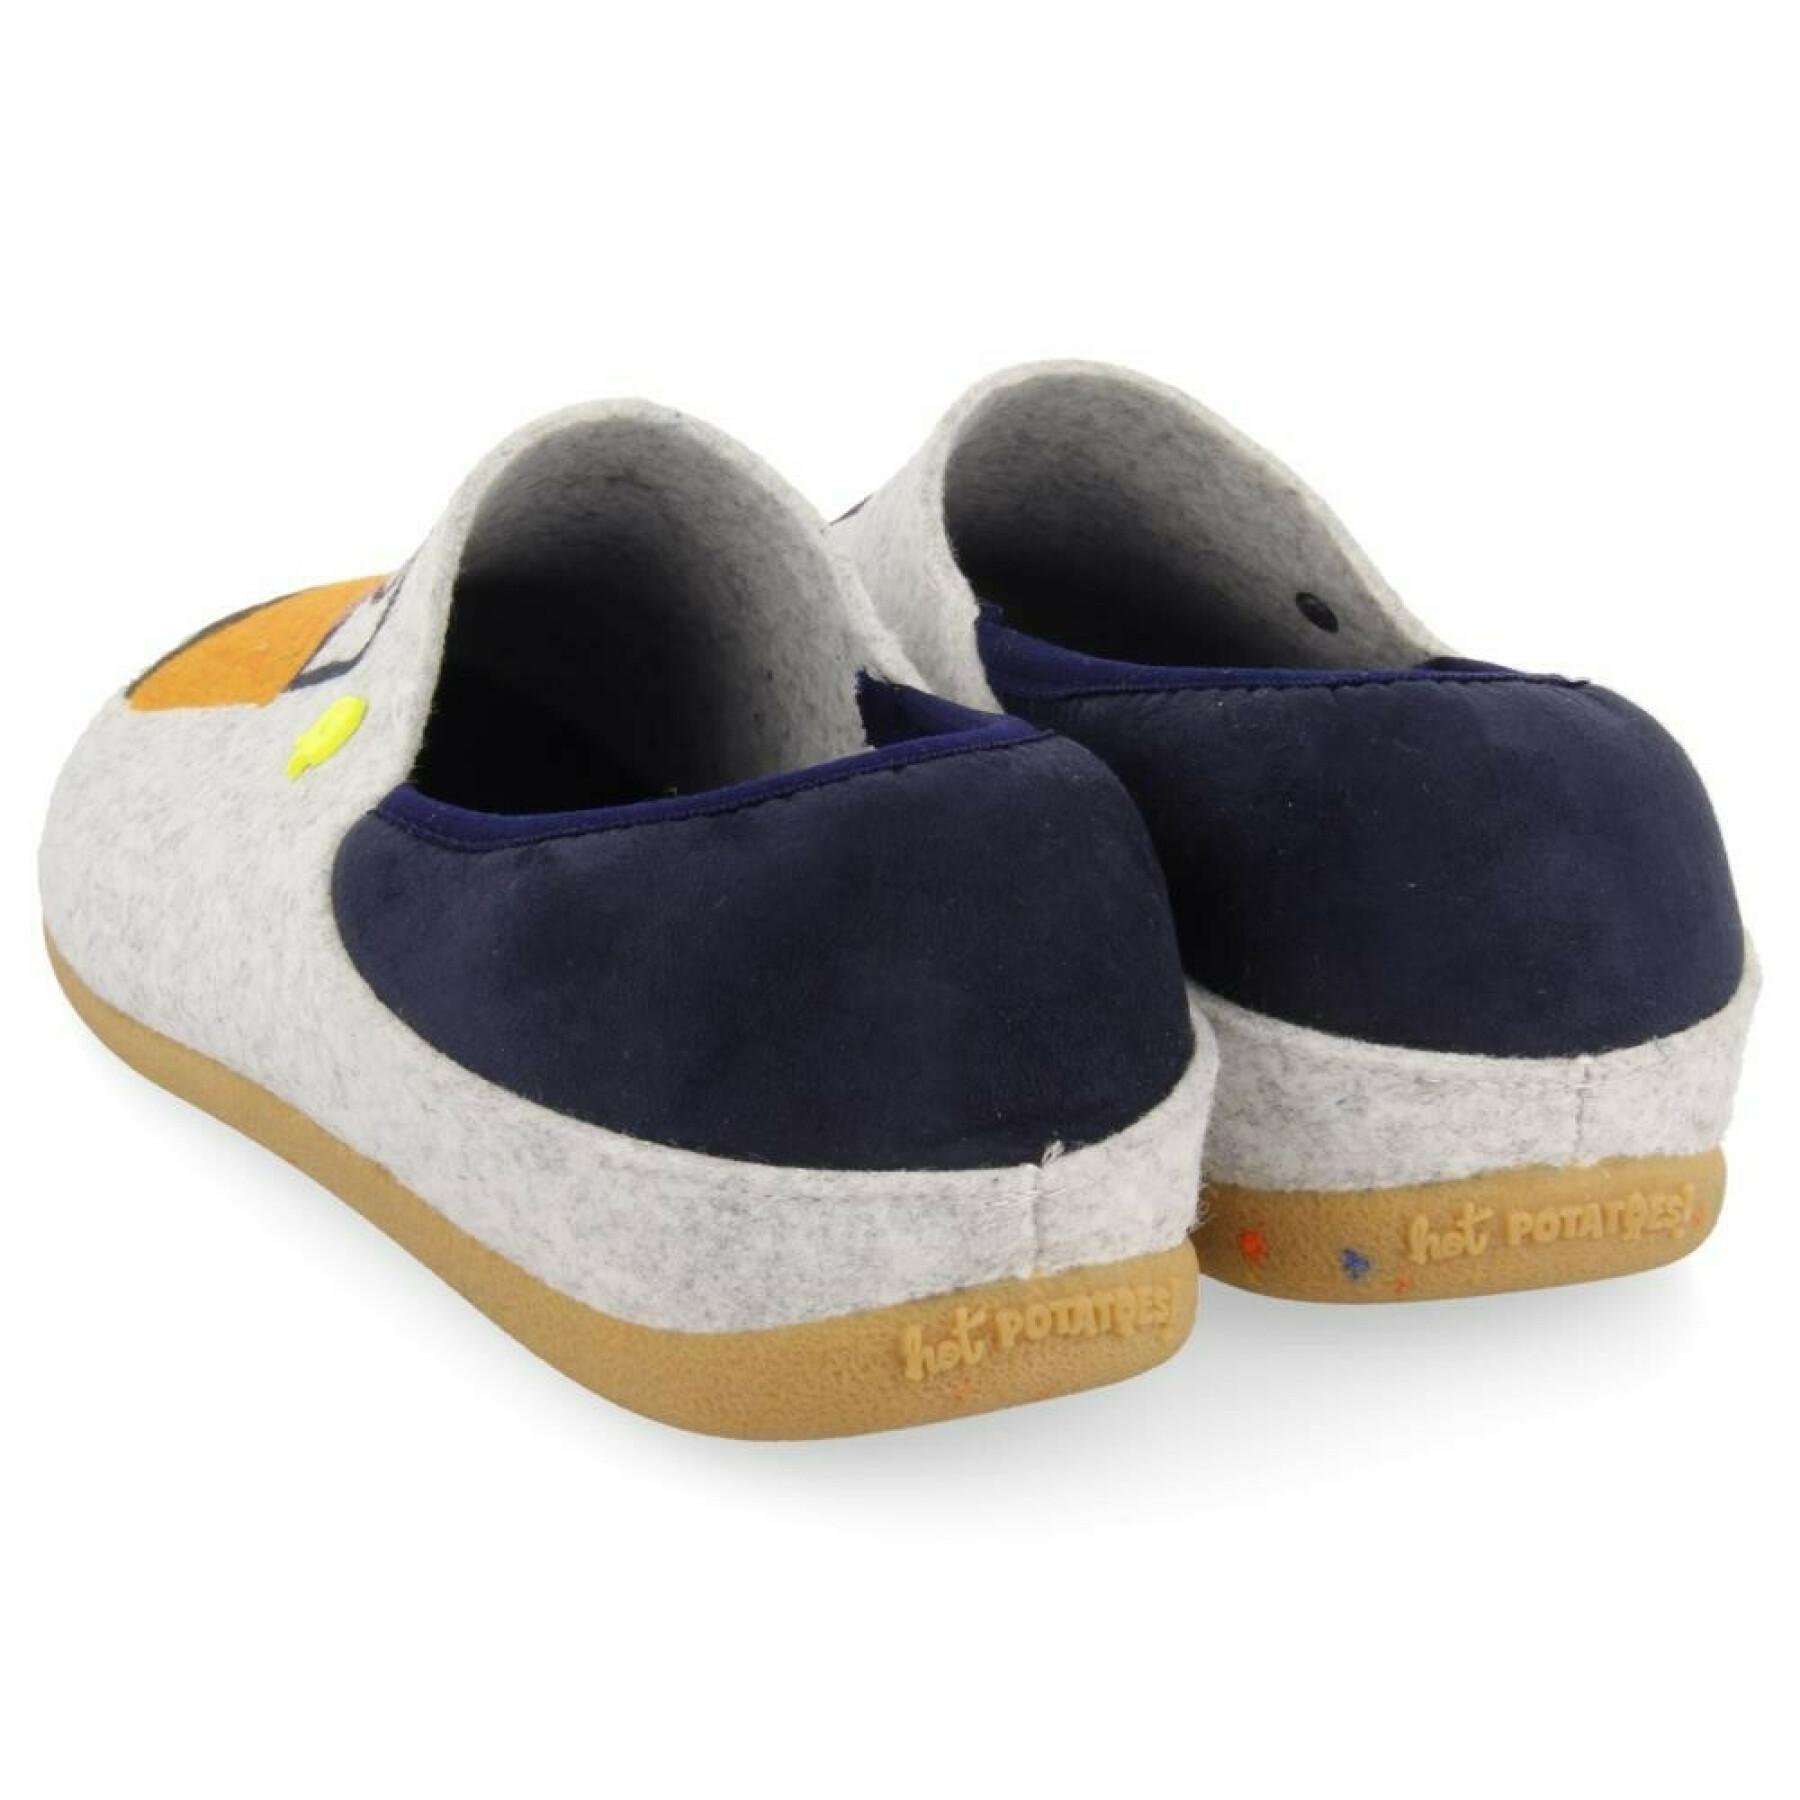 Slippers from the collection Hot Potatoes kauns